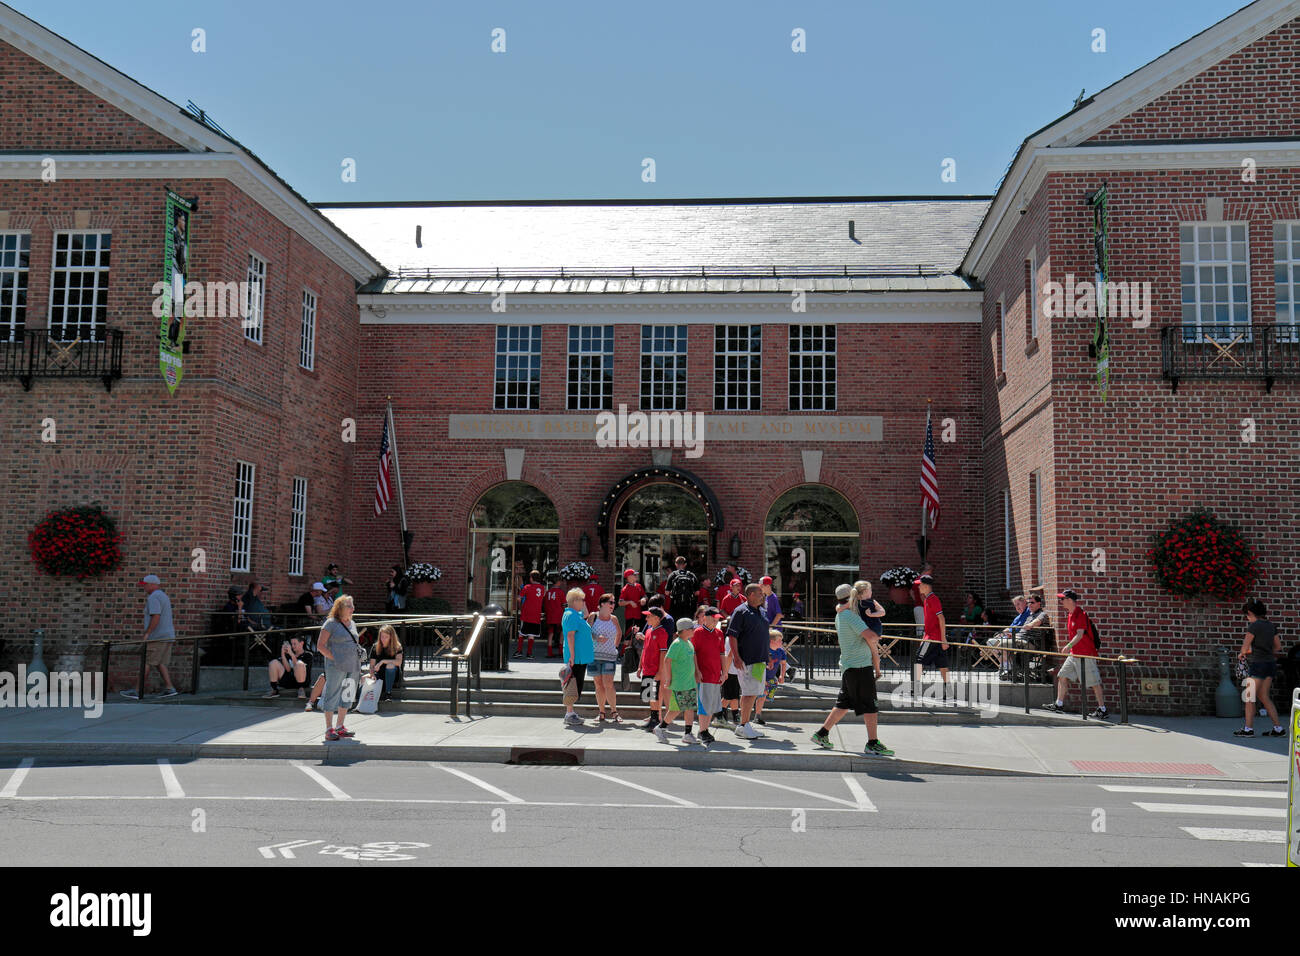 Main entrance to the Major League Baseball Hall of Fame in Historic Cooperstown, Otsego County, New York, United States. Stock Photo